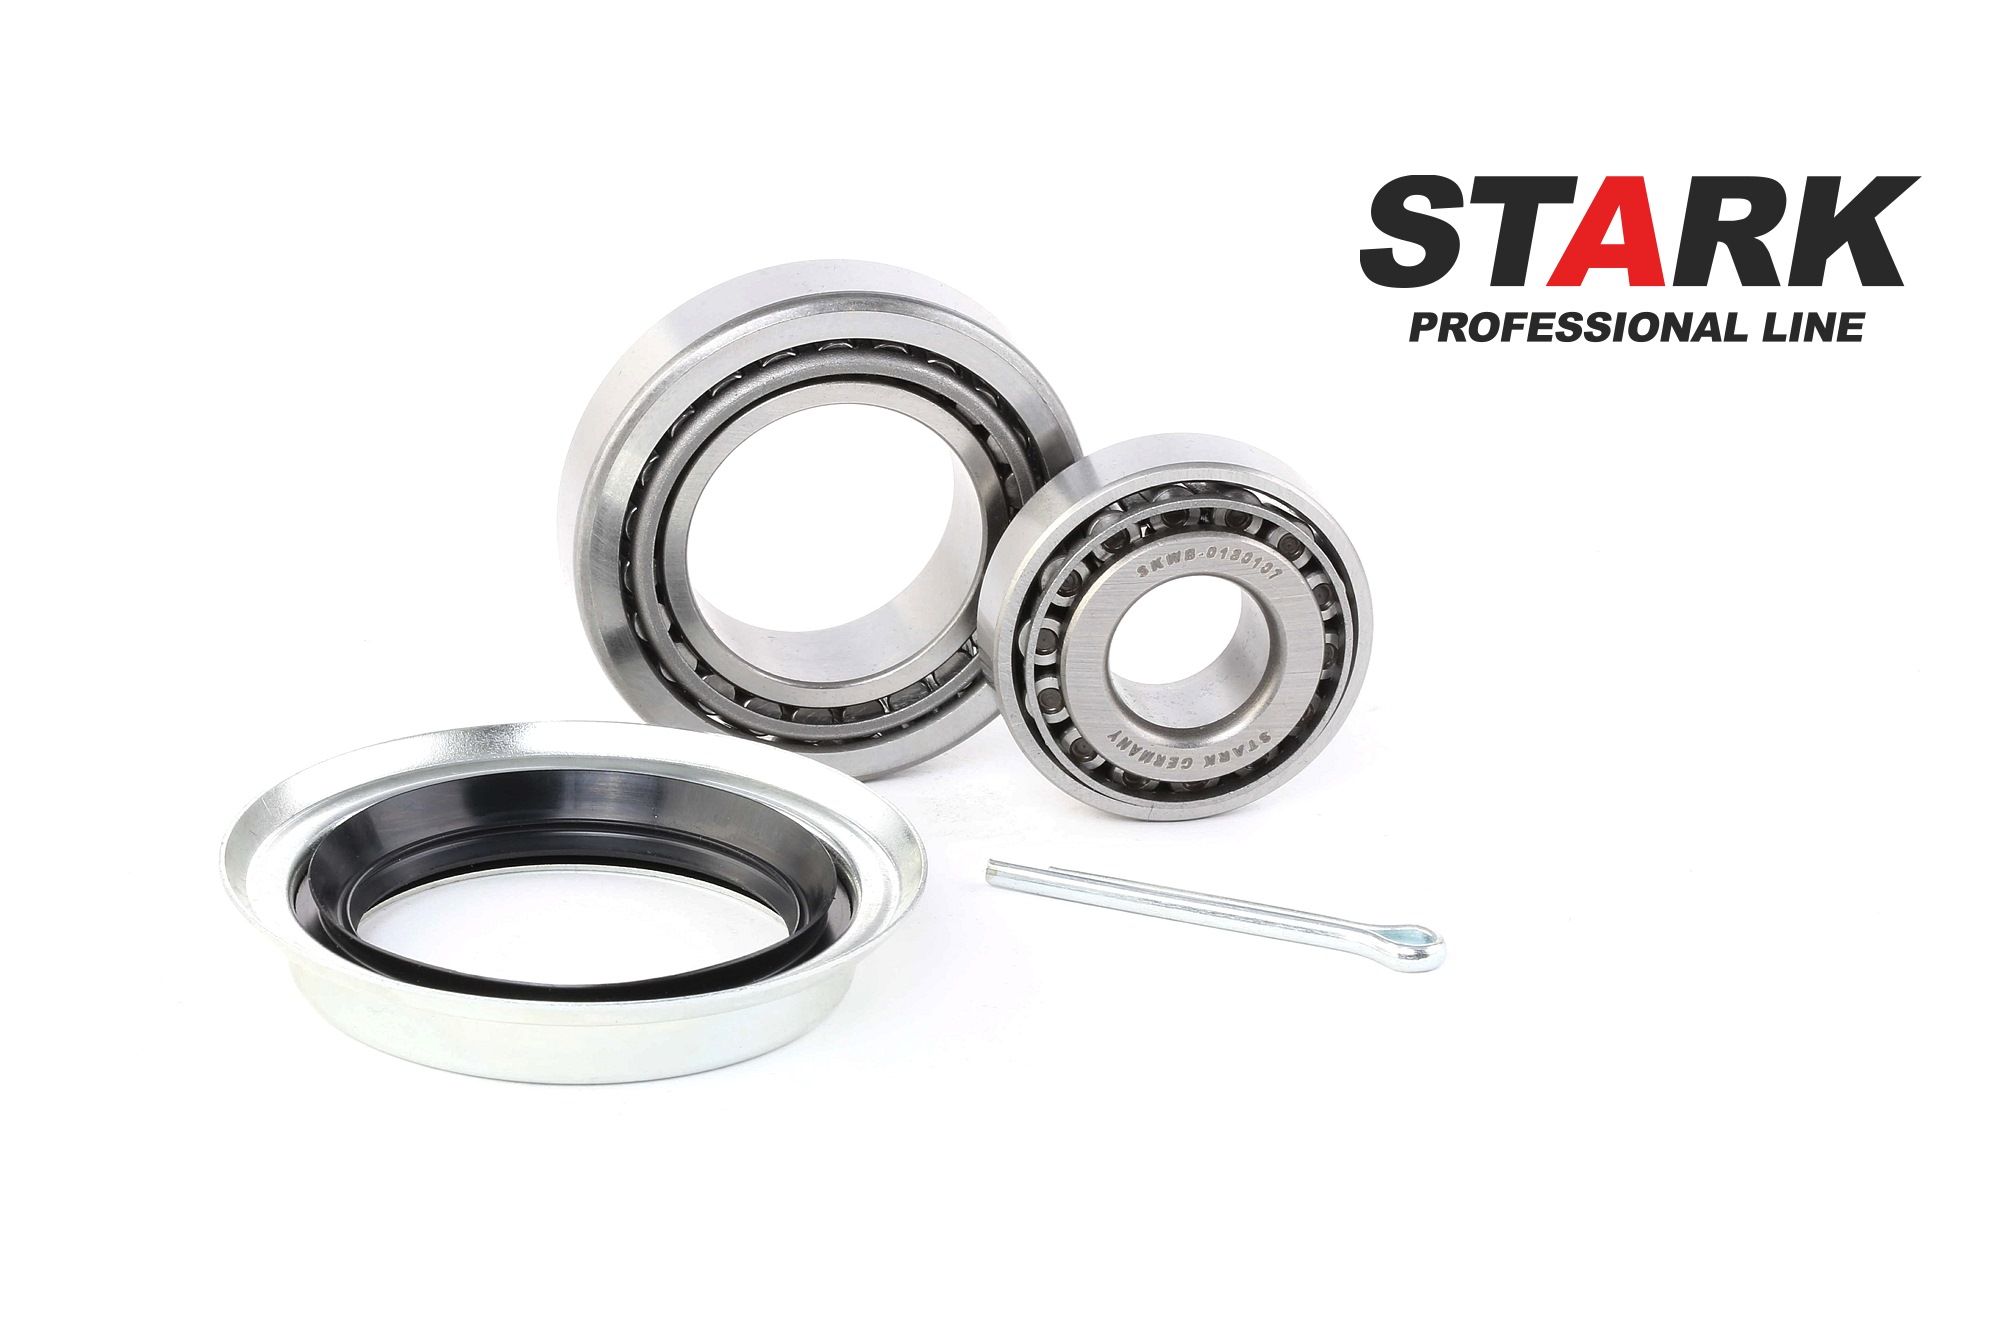 STARK SKWB-0180107 Wheel bearing kit Front axle both sides, Photo corresponds to scope of supply, 62,00, 45,237 mm